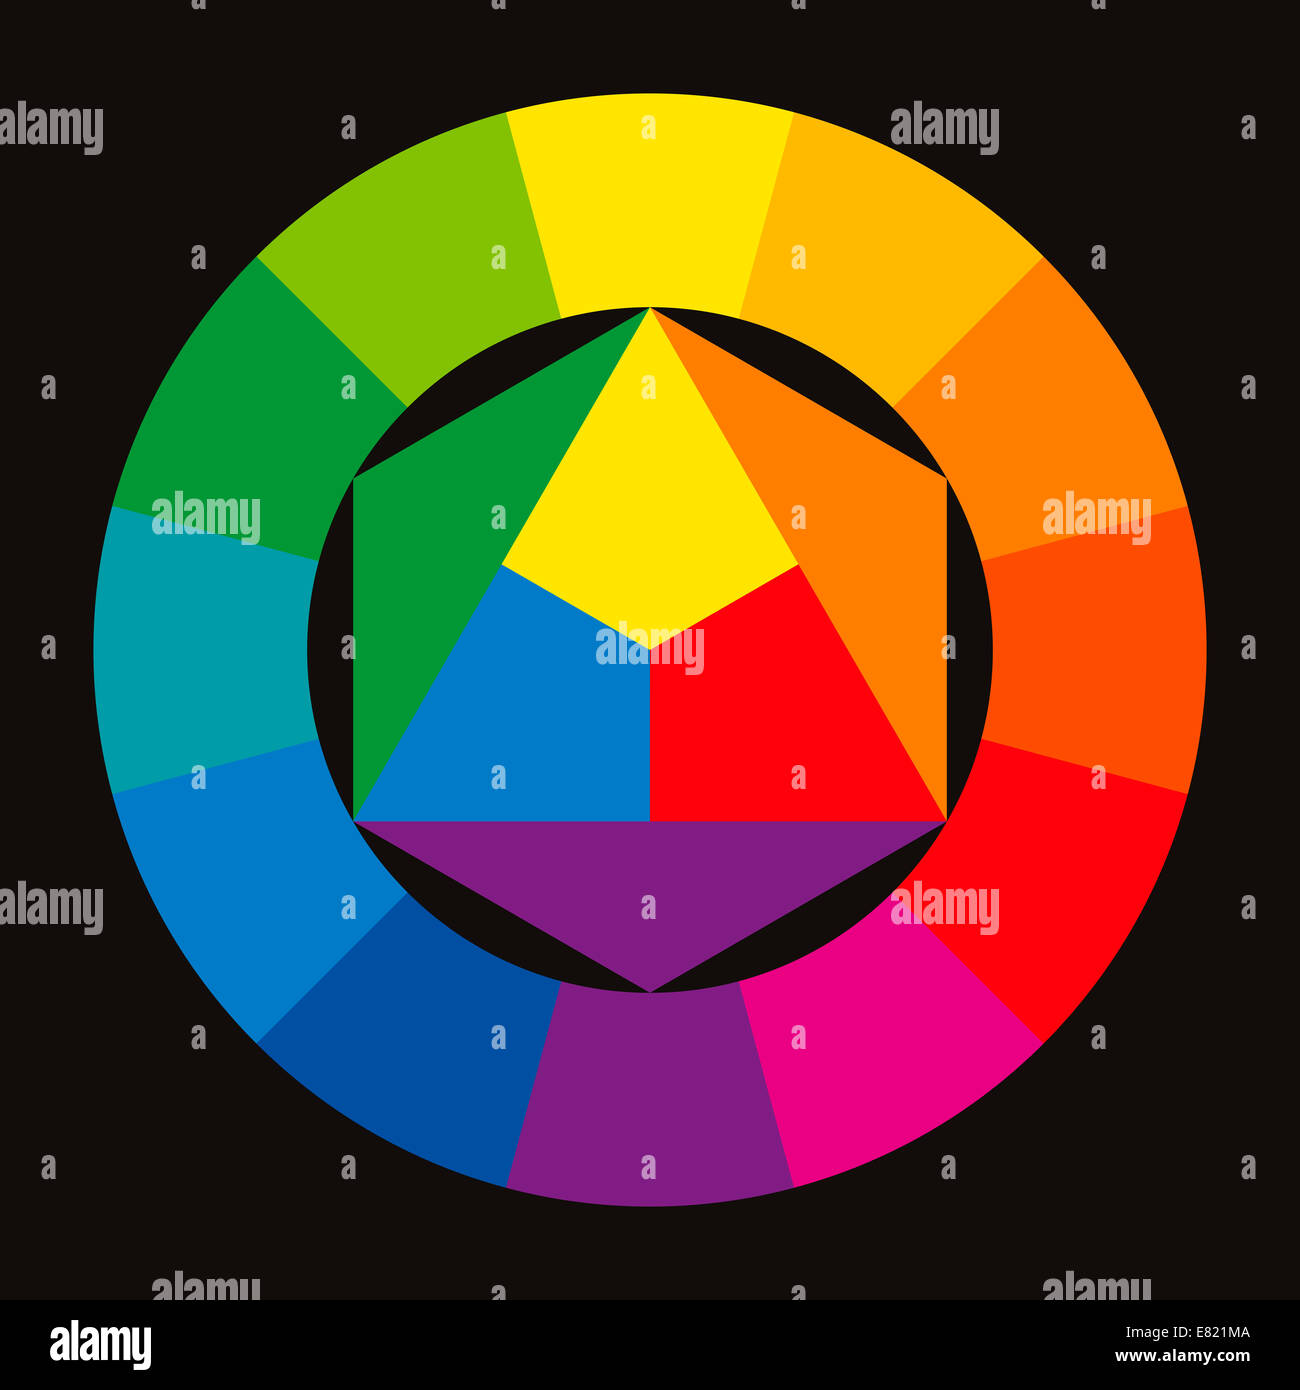 Color wheel, showing complementary colors. Primary colors in the center and resulting mixed colors in the circle. Stock Photo